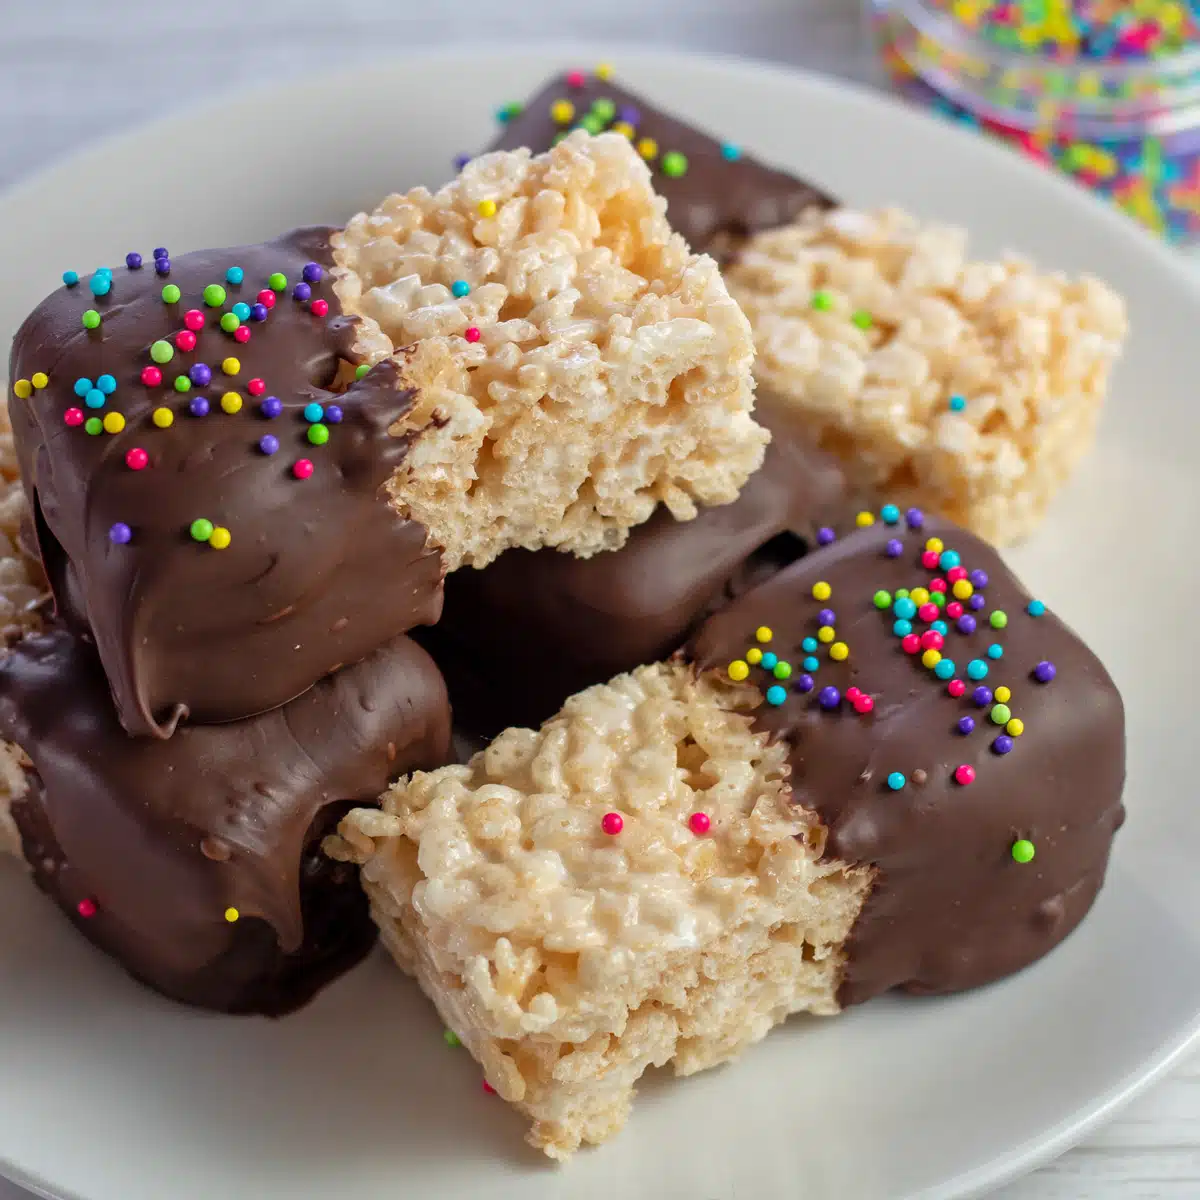 Best chocolate dipped Rice Krispies treats sprinkled with nonpareils and served on plate.